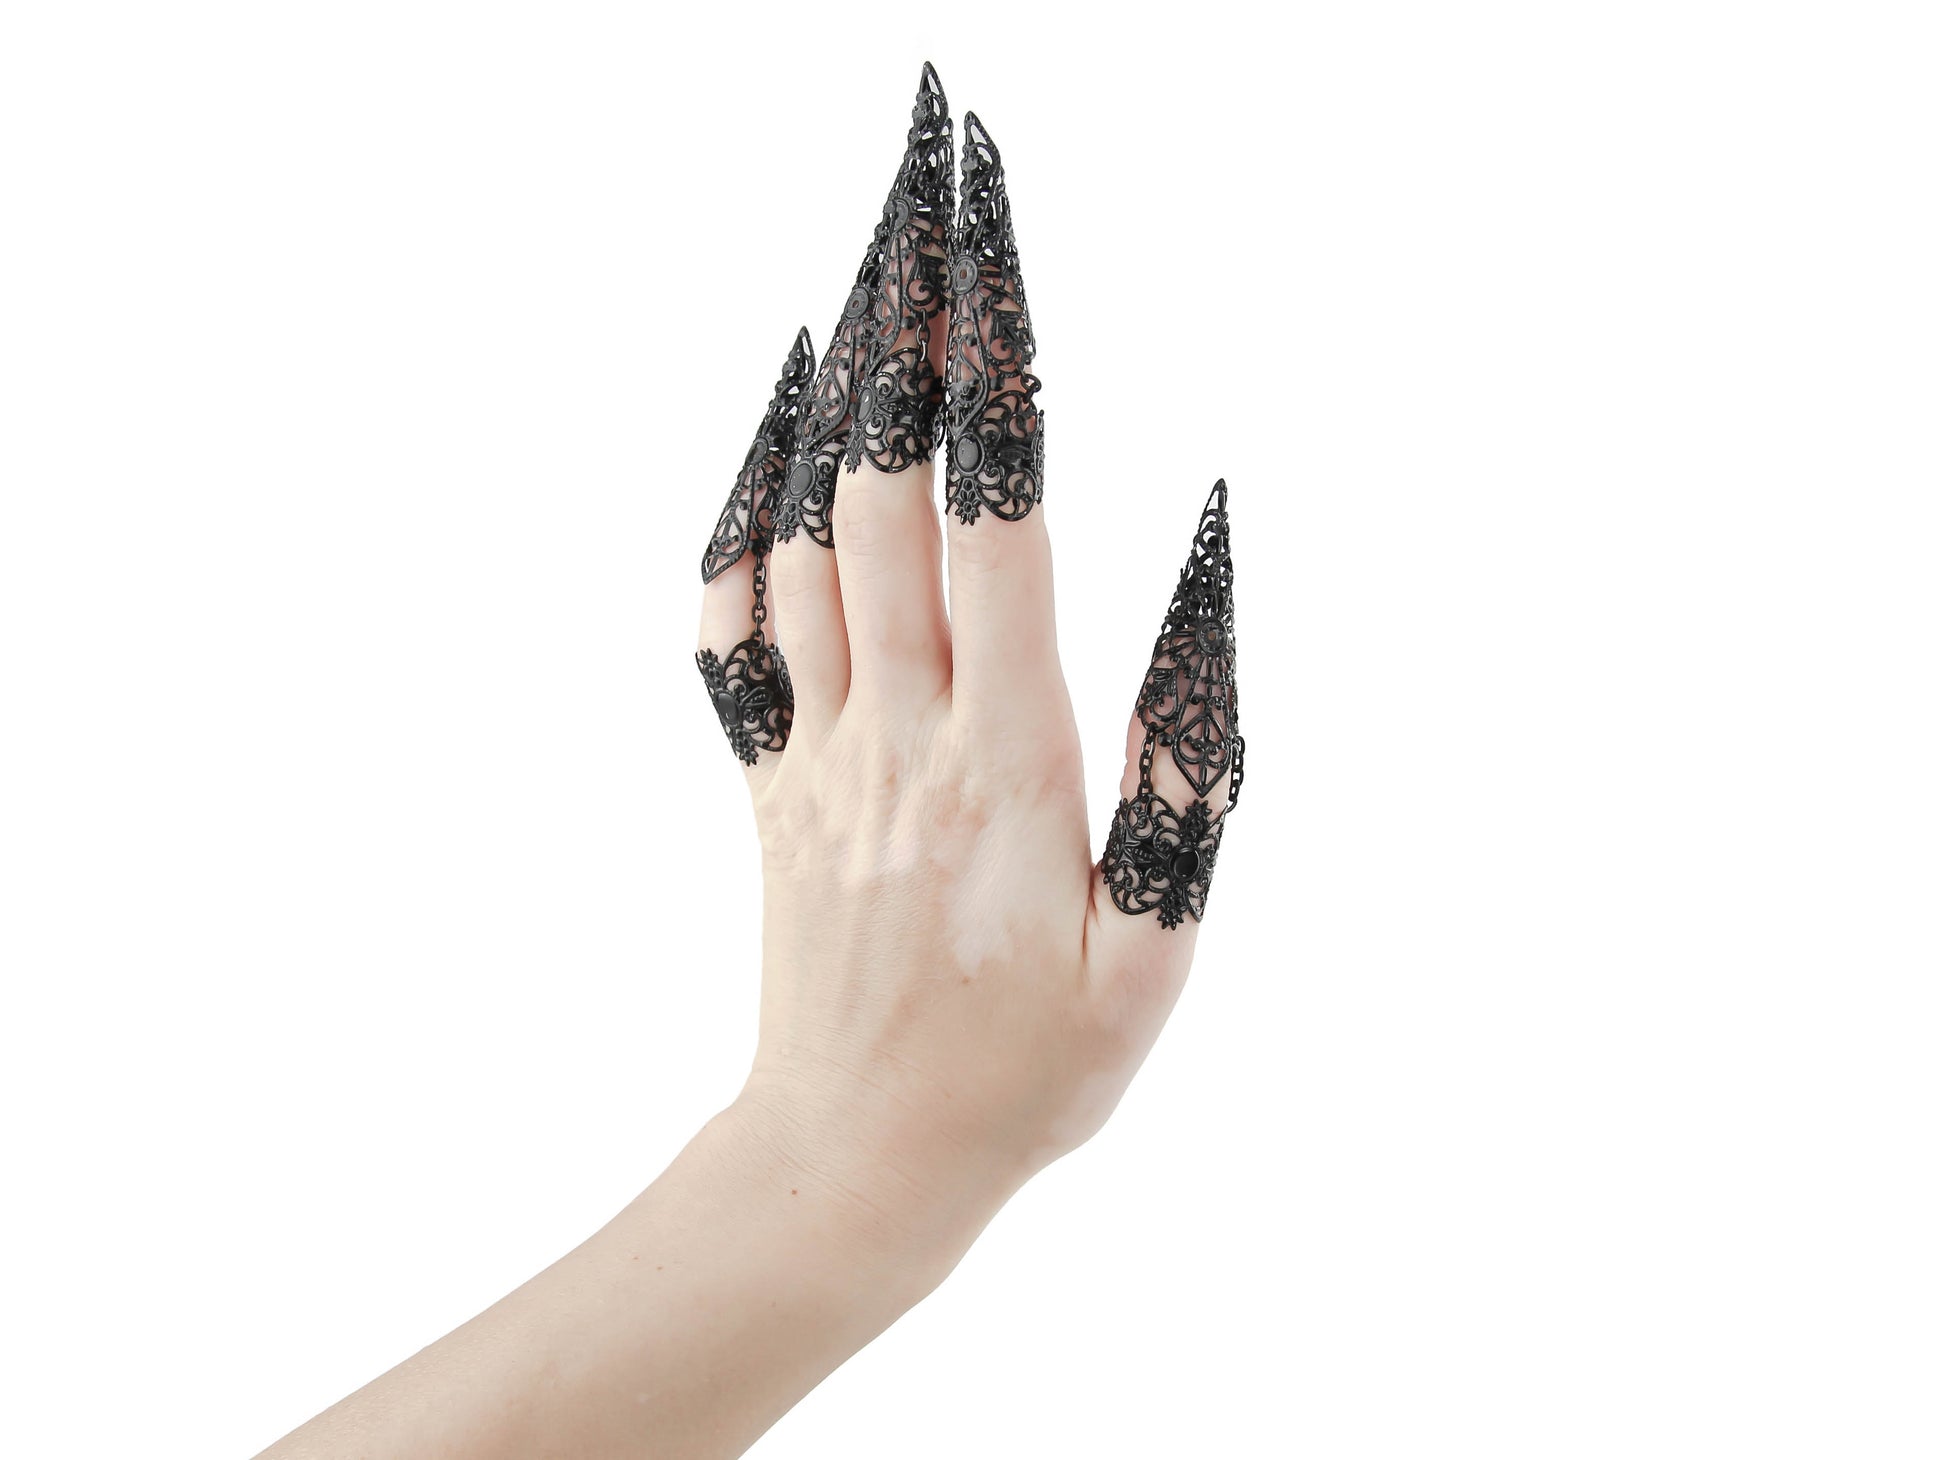 Step into the world of Myril Jewels with this captivating full hand set of midi rings, masterfully designed with claw-like extensions for a bold neo-goth statement. These black rings exude a dark-avantgarde allure, perfect for those who embrace gothic-chic and whimsigoth styles. The intricate detail of each piece makes it an essential accessory for Halloween, while also being versatile enough for everyday wear.